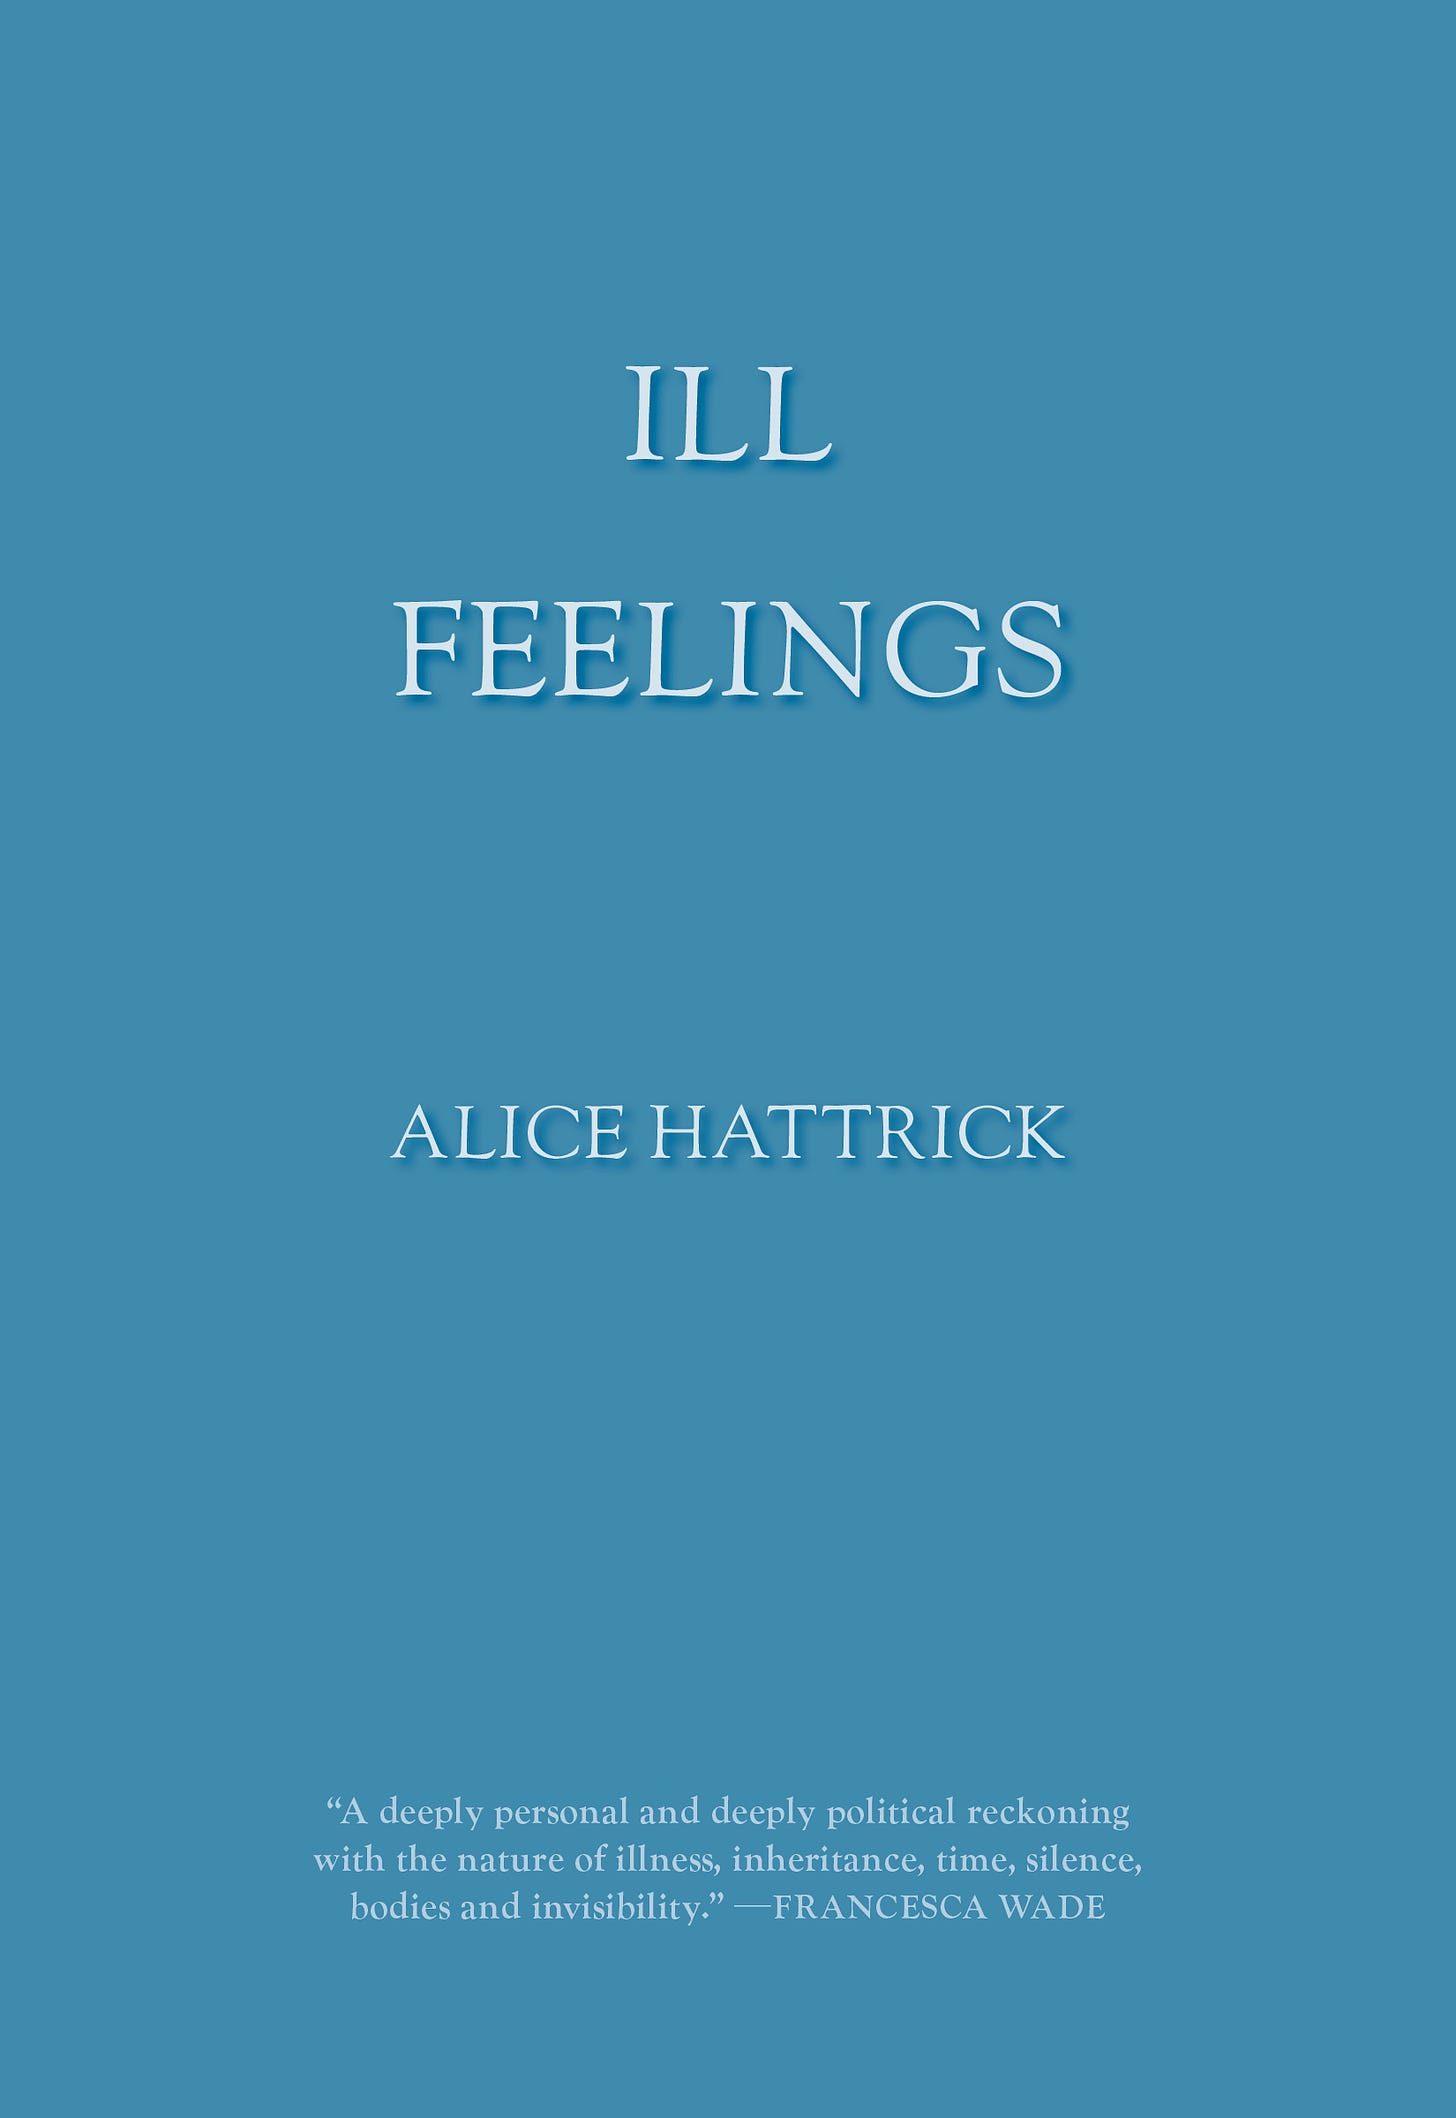 A light blue book cover, with the title and author name in centered greyish-white text 